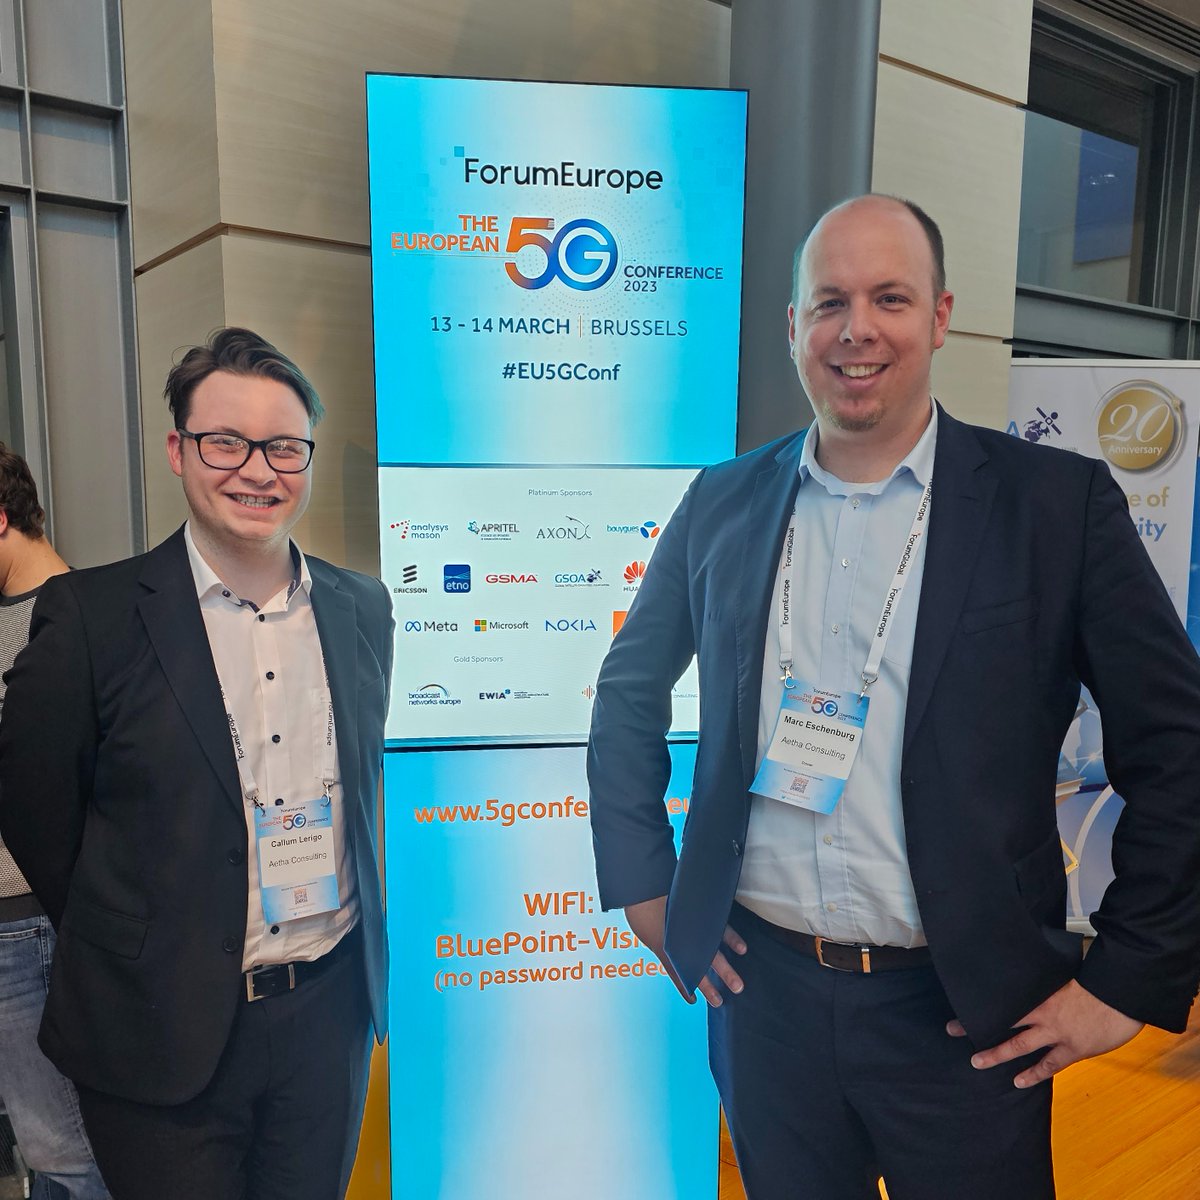 Aetha's Marc Eschenburg and Callum Lerigo are currently in attendance at @ForumEurope's #EU5GConf in Brussels. Tomorrow, Marc will be moderating session 8, discussing Europe's aspirations for #WRC23 and #5G. Find out more about the conference here: 5gconference.eu